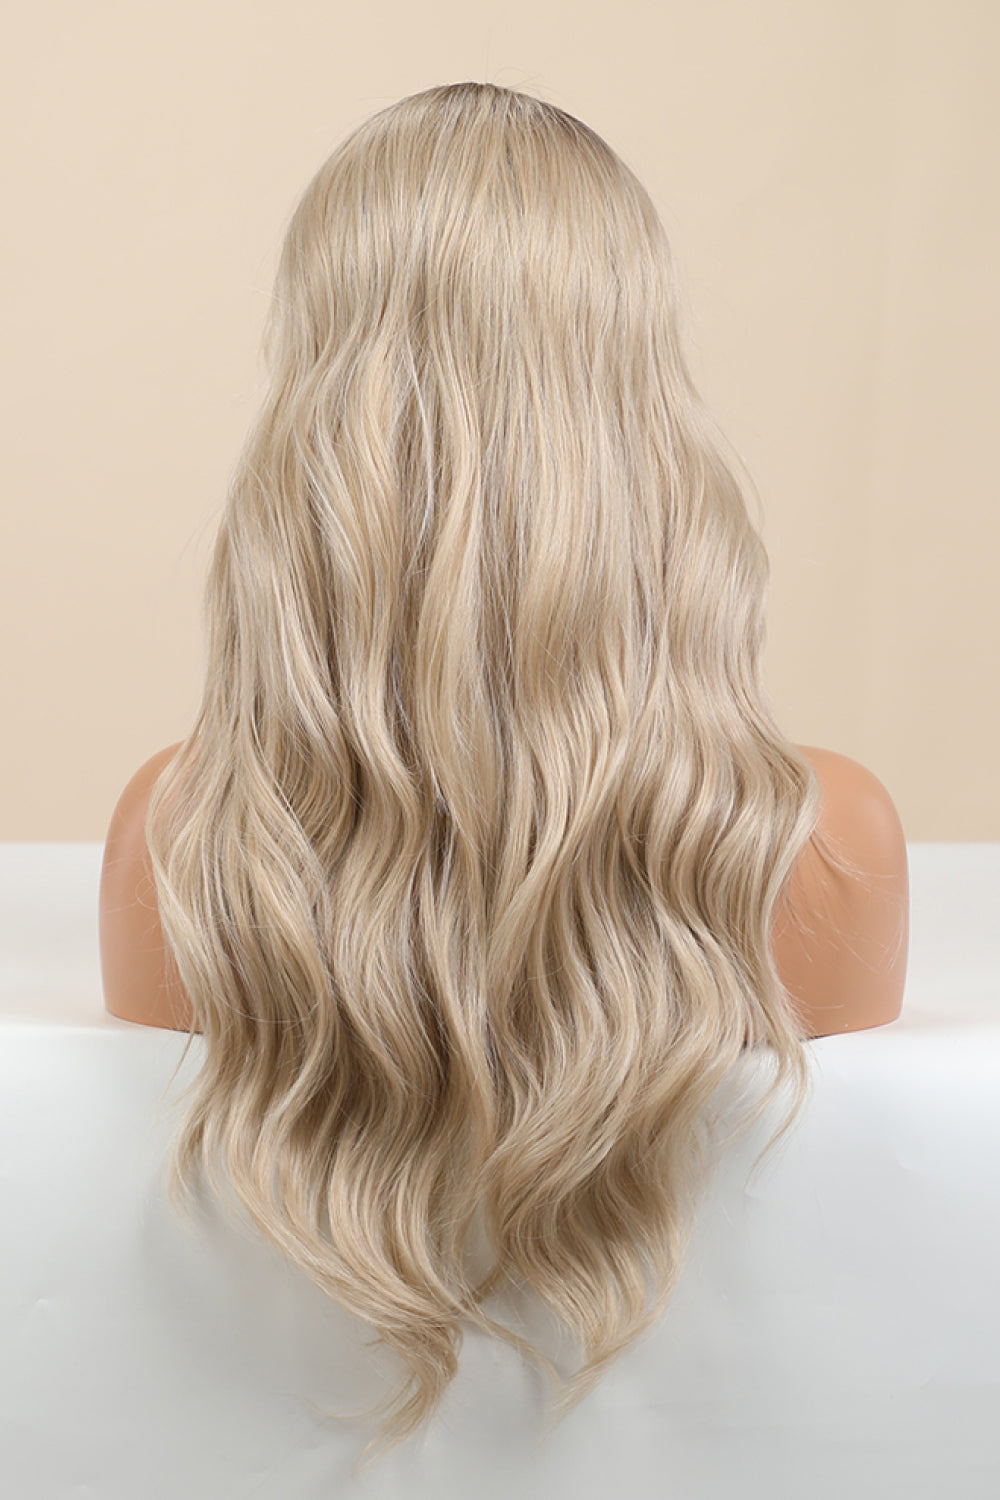 26" Long Wavy Lace Front Wig in Golden Blonde